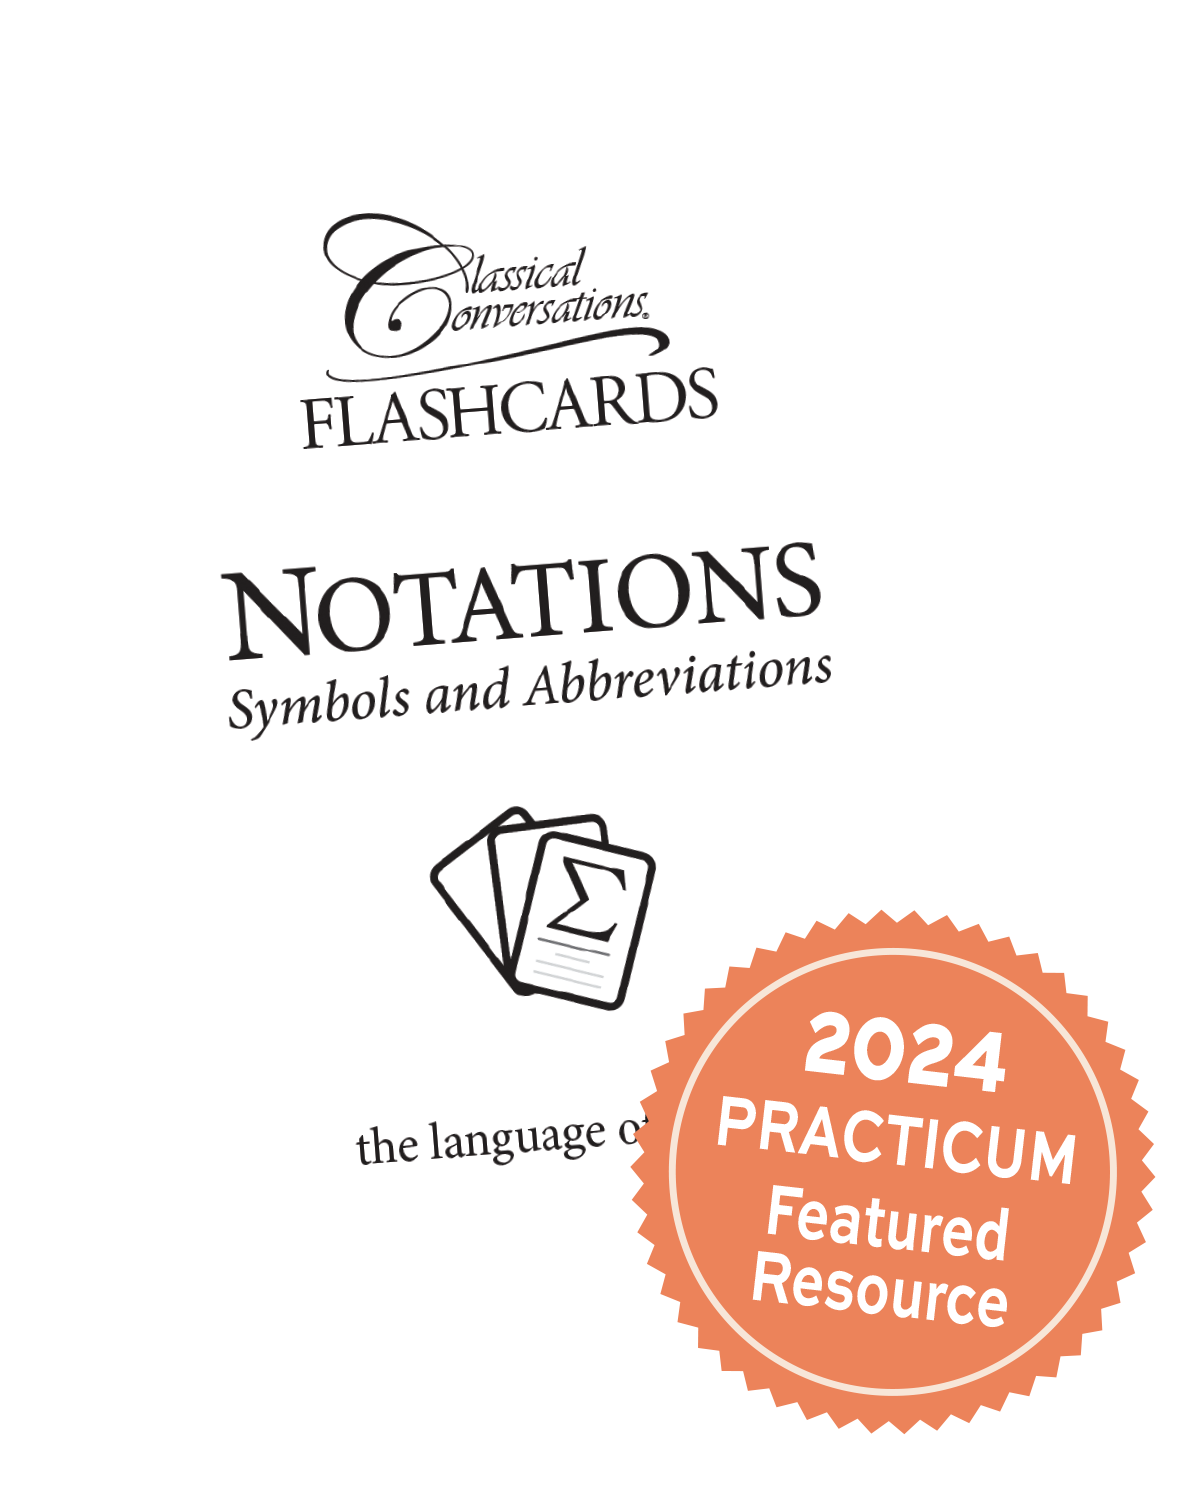 Notations Flash Cards, a 2024 Practicum featured resource